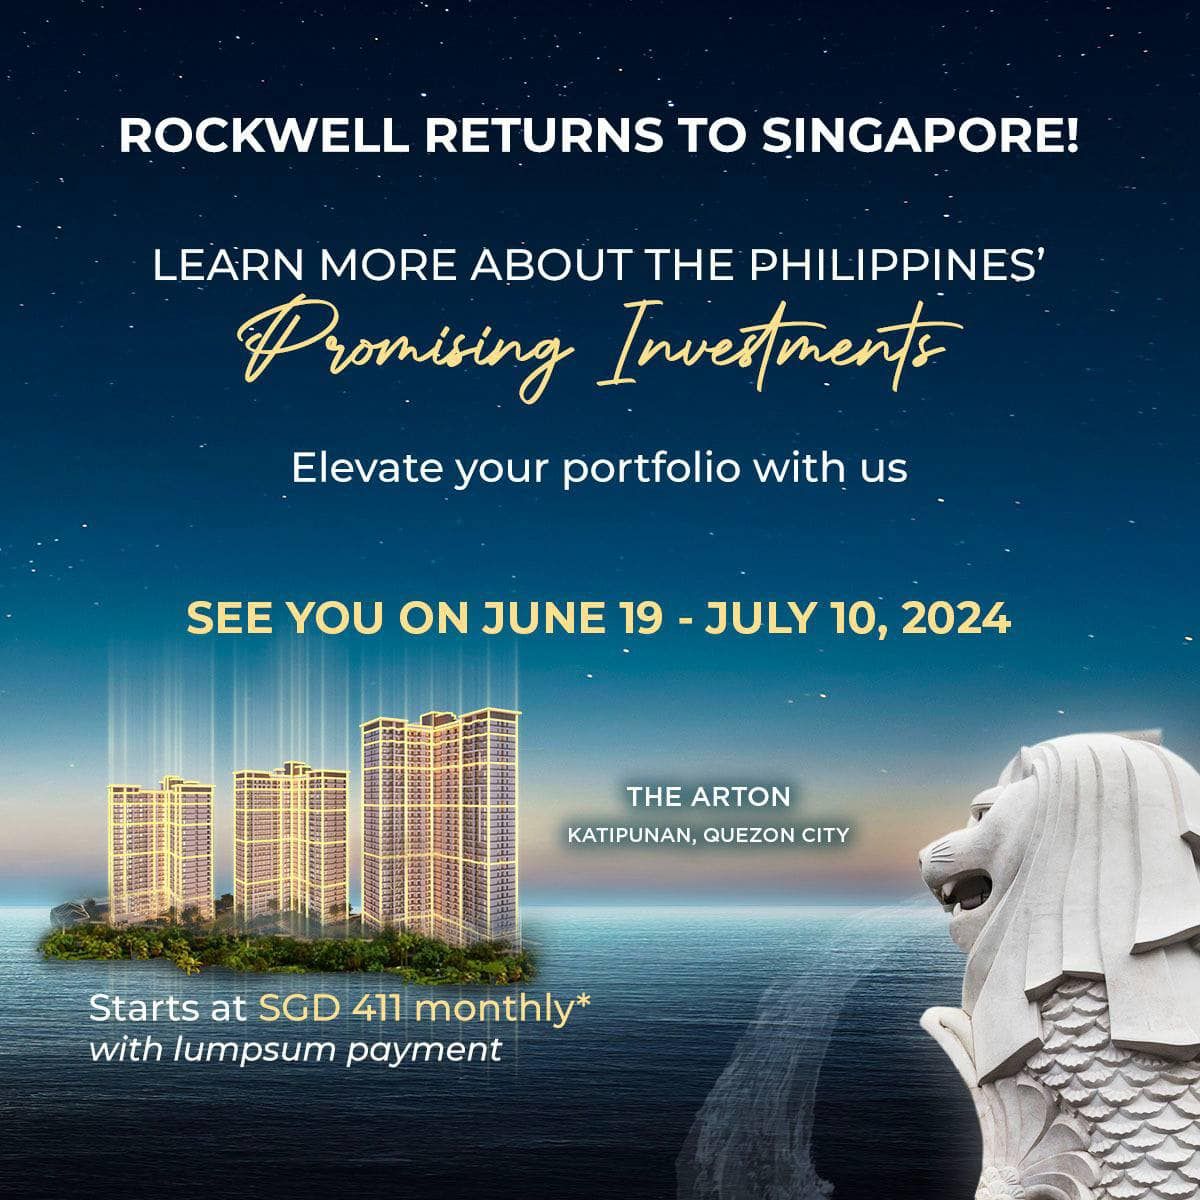 Rockwell Land International Investment Opportunity